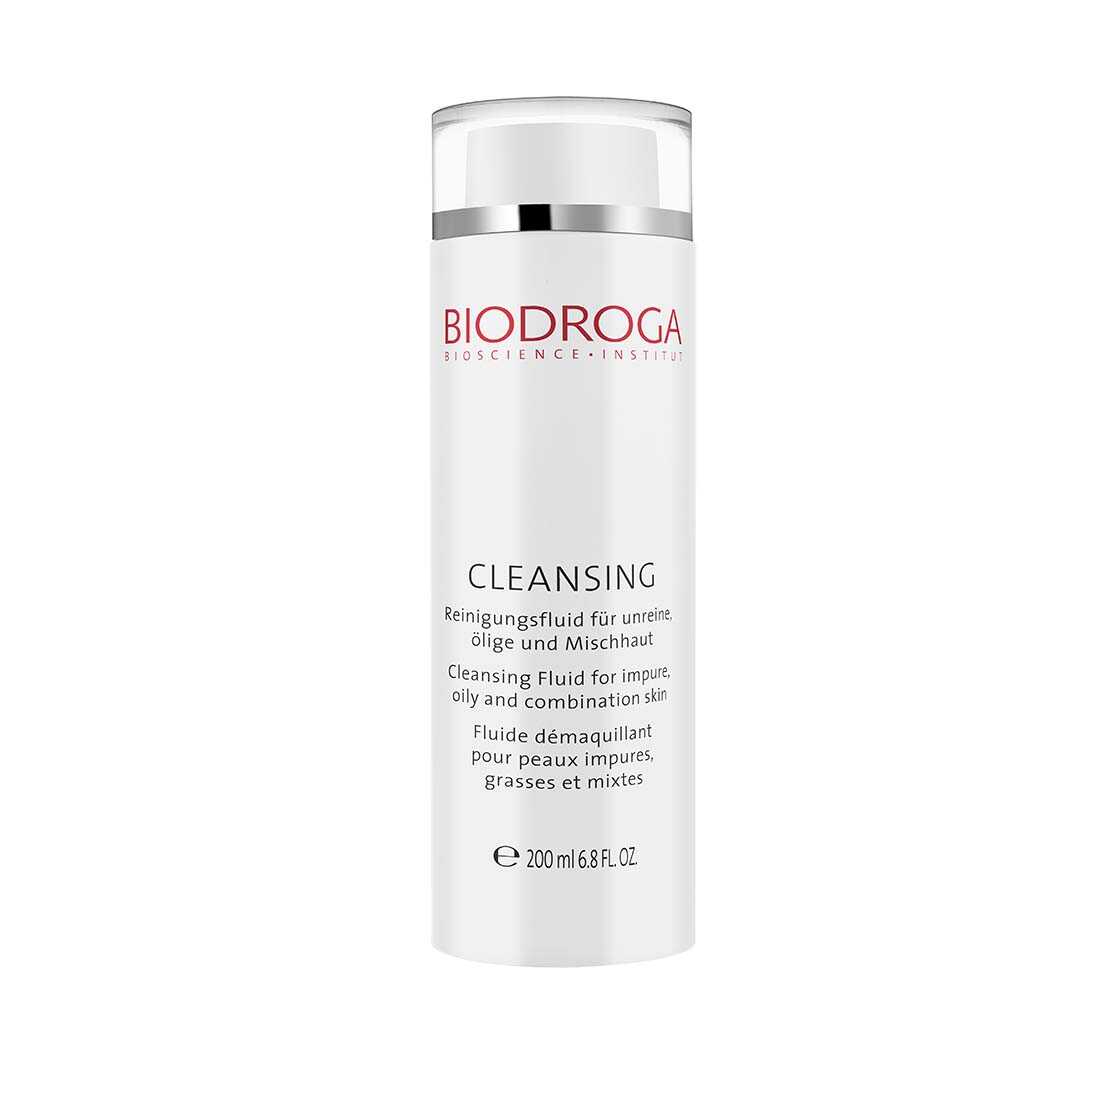 BIODROGA CLEANSING Cleansing Fluid impure,oily,combination skin